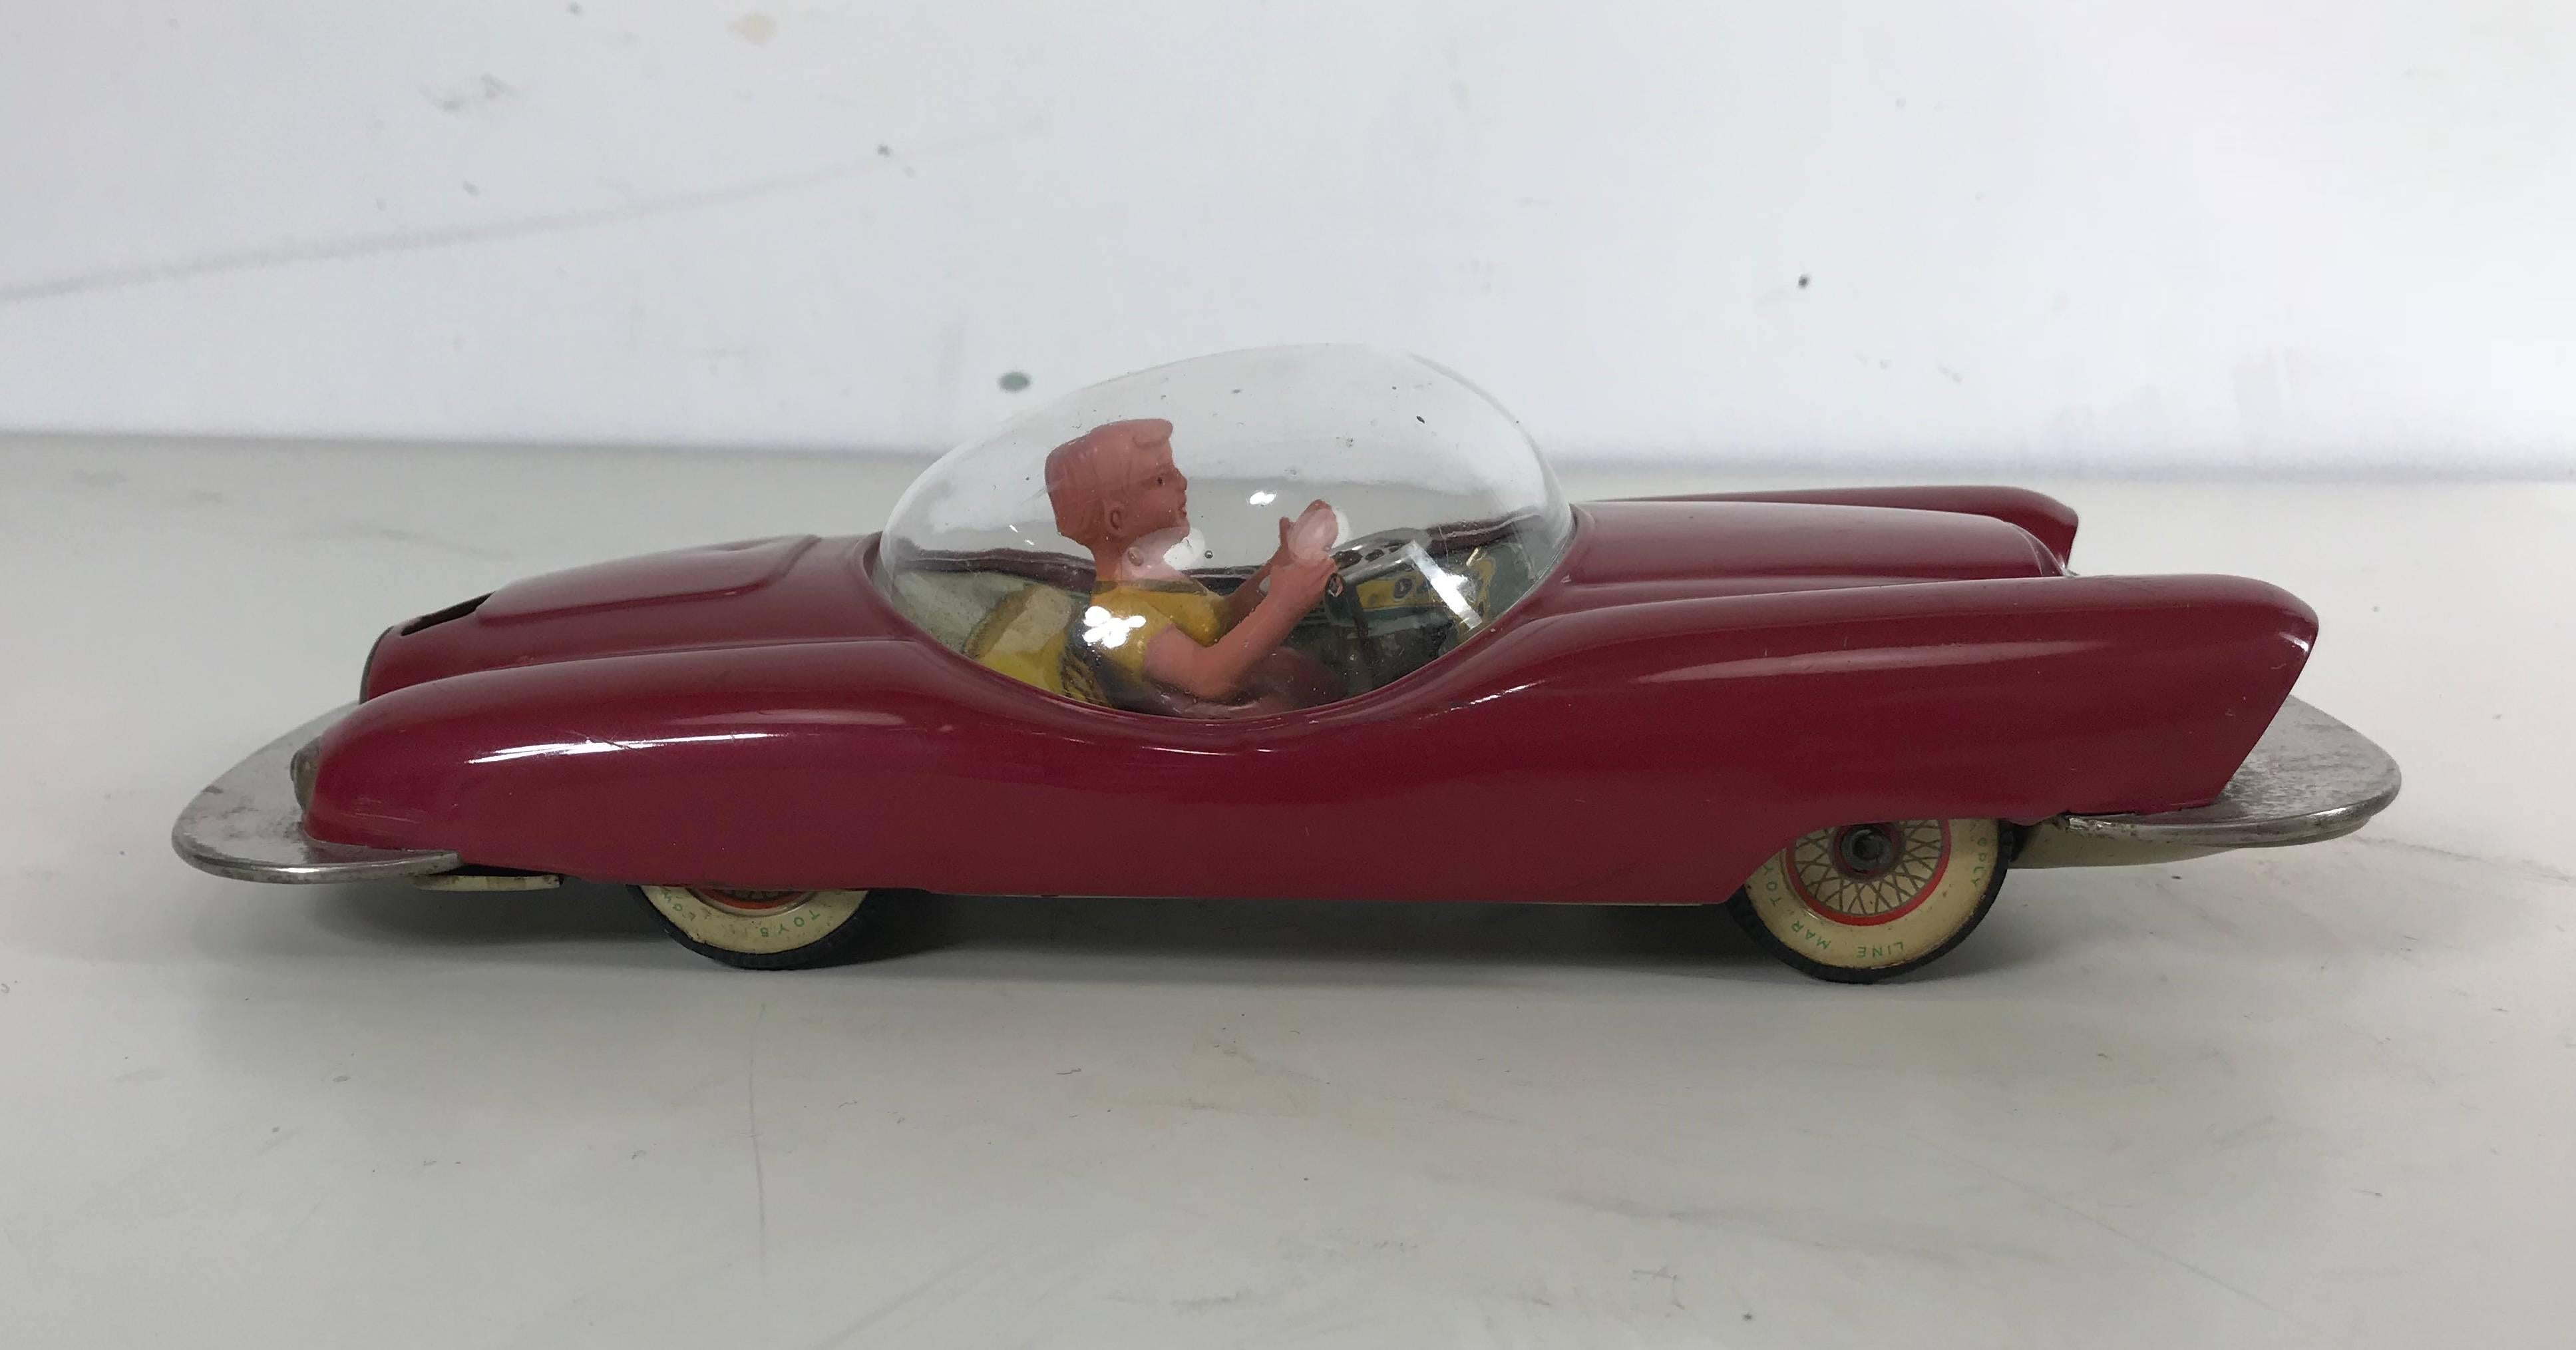 Futuristic Roadster 1956 Japanese tin car complete with acrylic bubble.

This particular car from Line Mar completely captures the 1956 future car concepts and puts it in tin and with a cockpit. The toy looks like it is ready for flight and is in